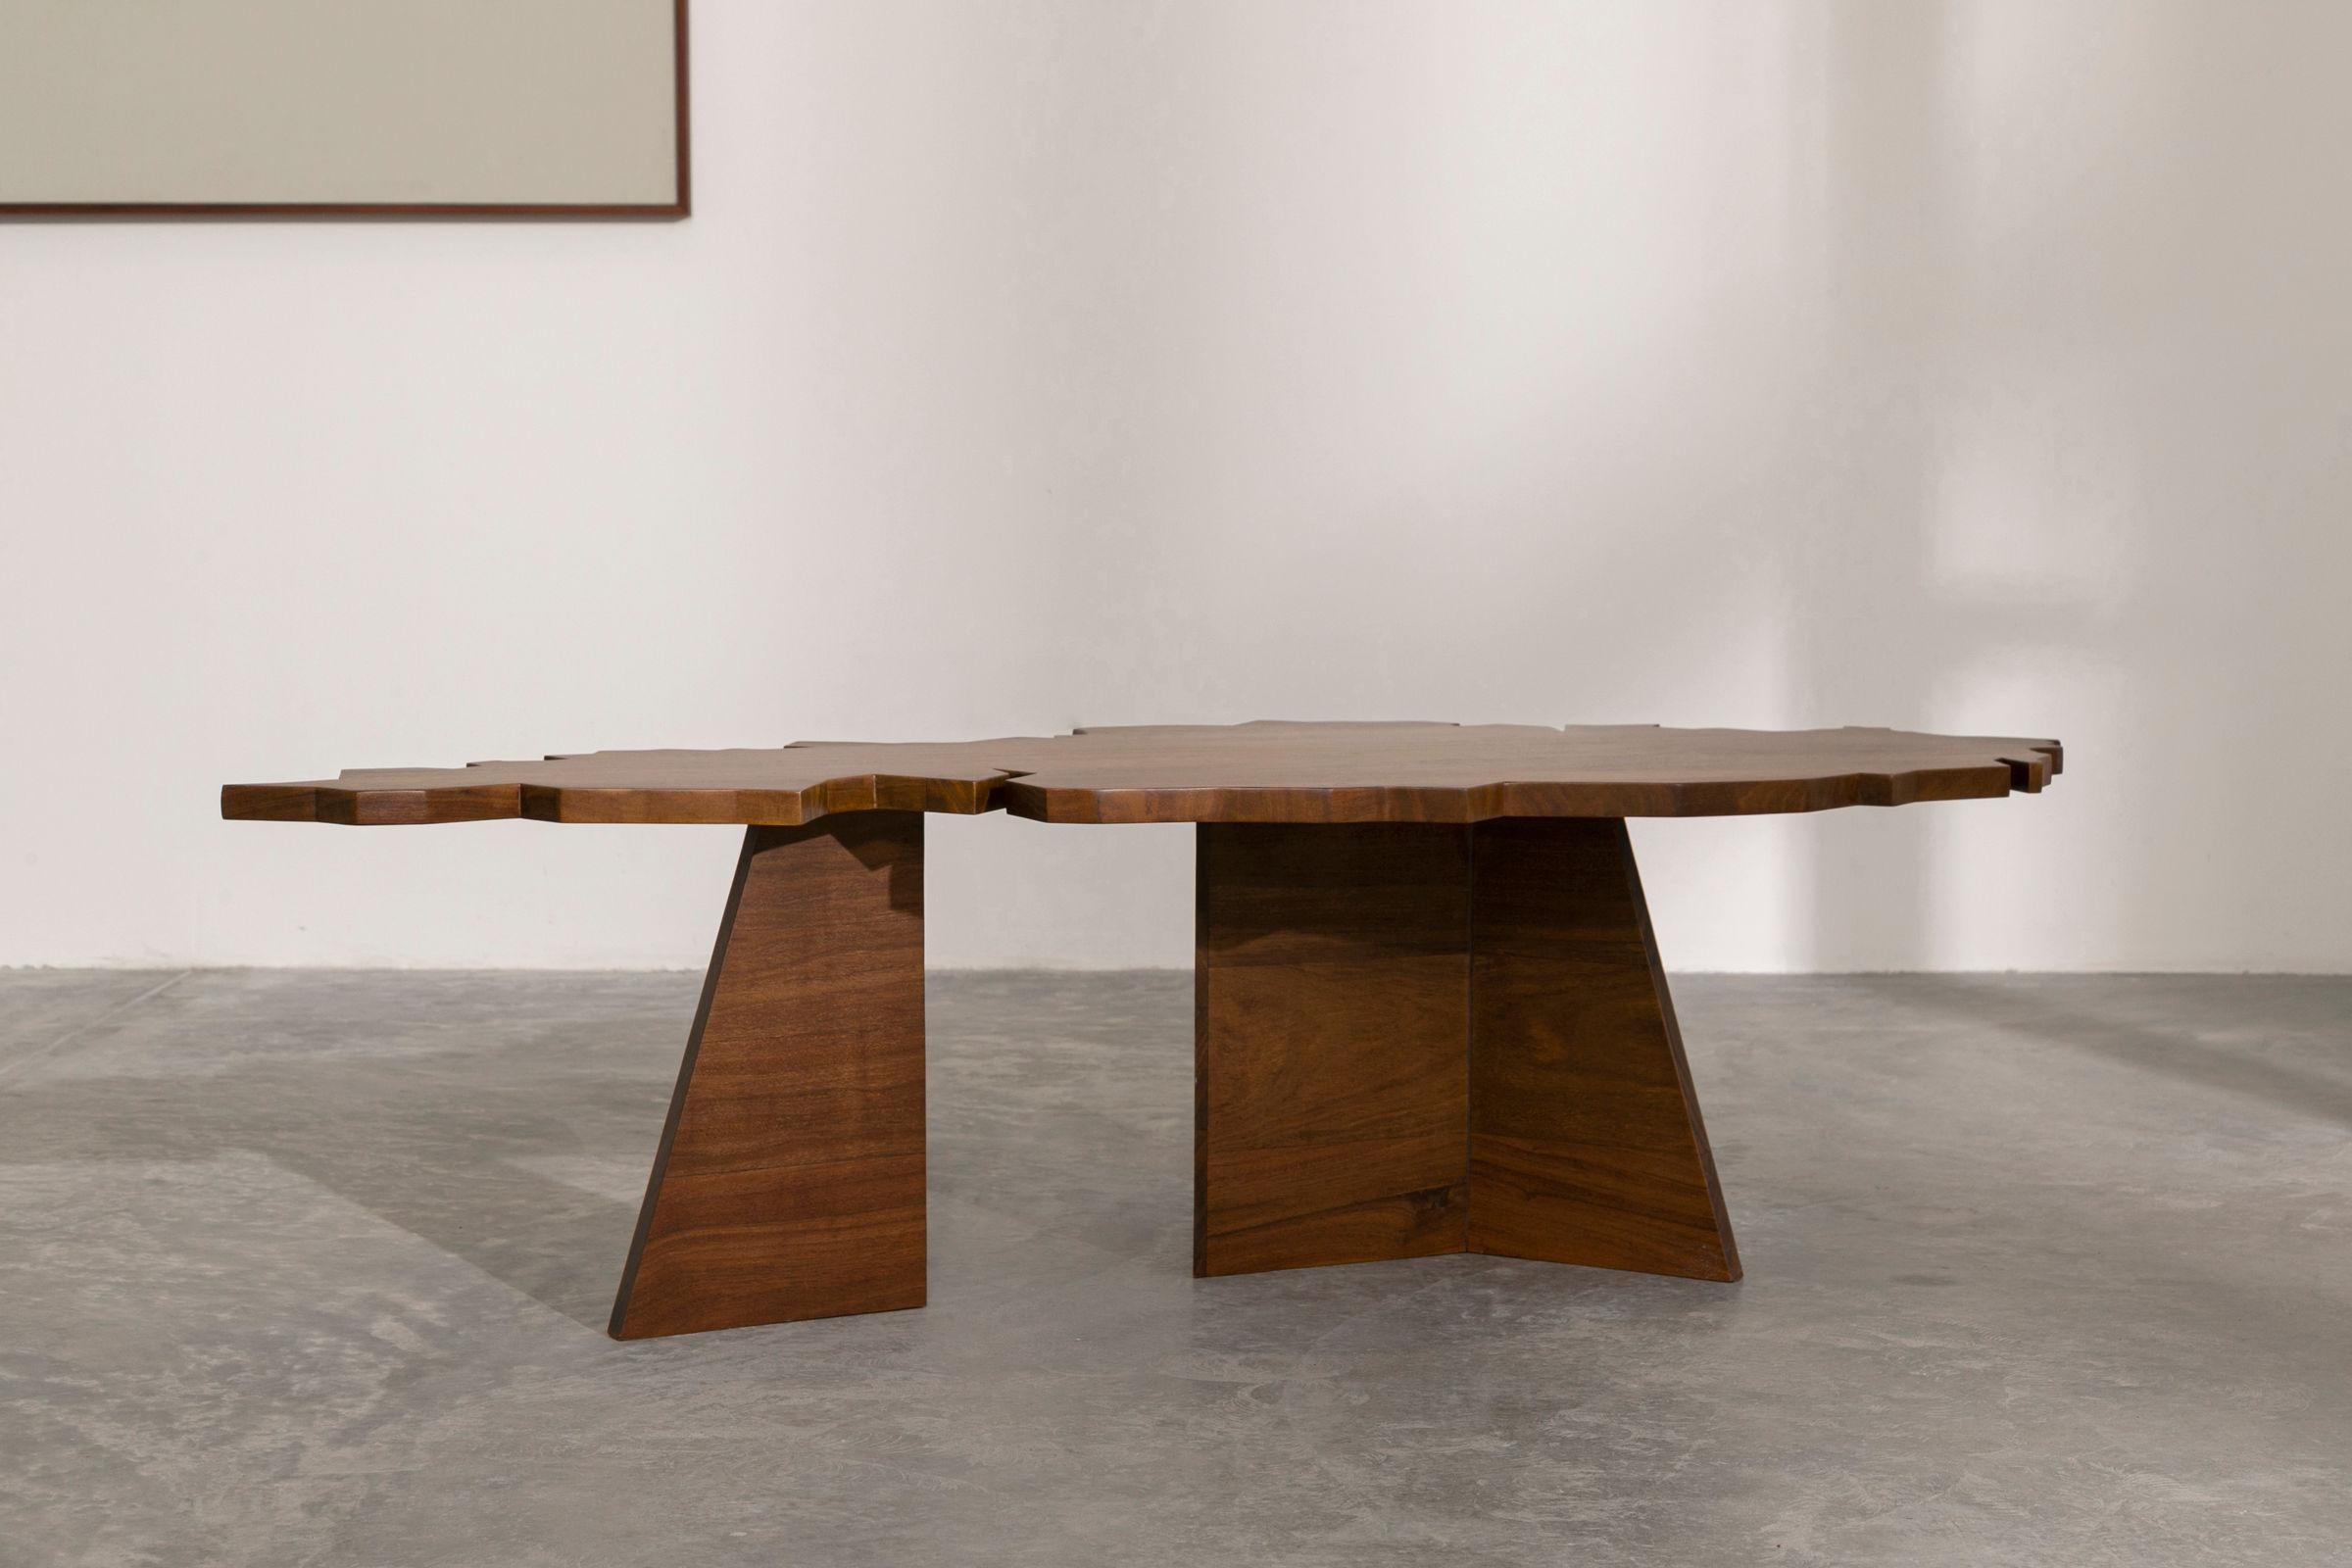 Leaf Table - Tropical Depression, Organic post-modern Coffee table in natural wood handmade in Panama by Fi.

Tropical Depression is a solo show by Fi - Sofía Alvarado (Panama, 1984).

In a pure state of consciousness, life is simple.
The